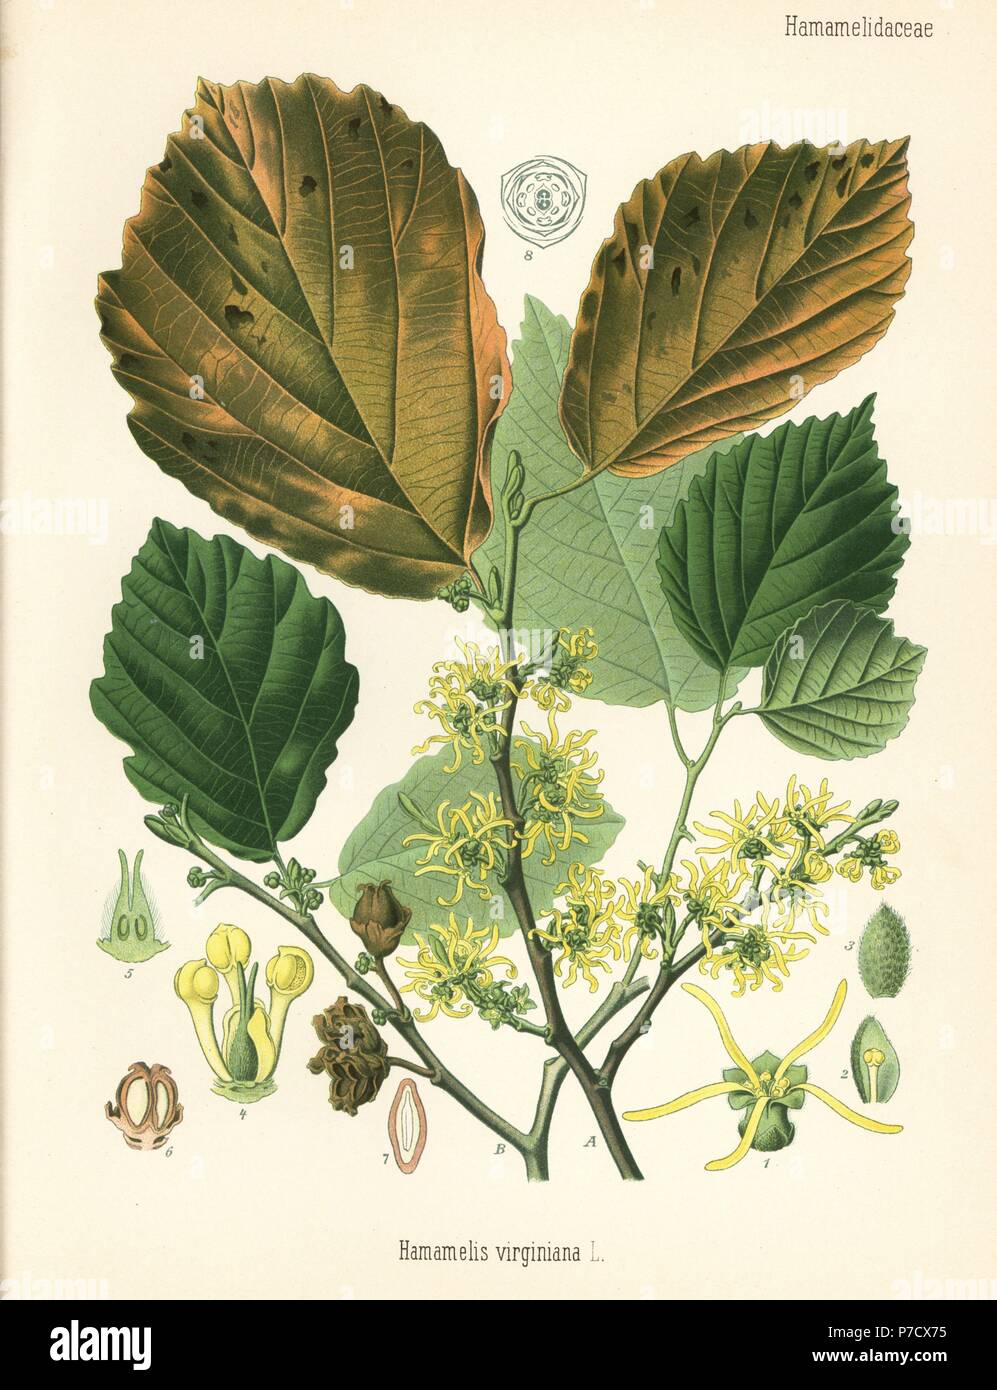 American witch-hazel, Hamamelis virginiana. Chromolithograph after a botanical illustration from Hermann Adolph Koehler's Medicinal Plants, edited by Gustav Pabst, Koehler, Germany, 1887. Stock Photo